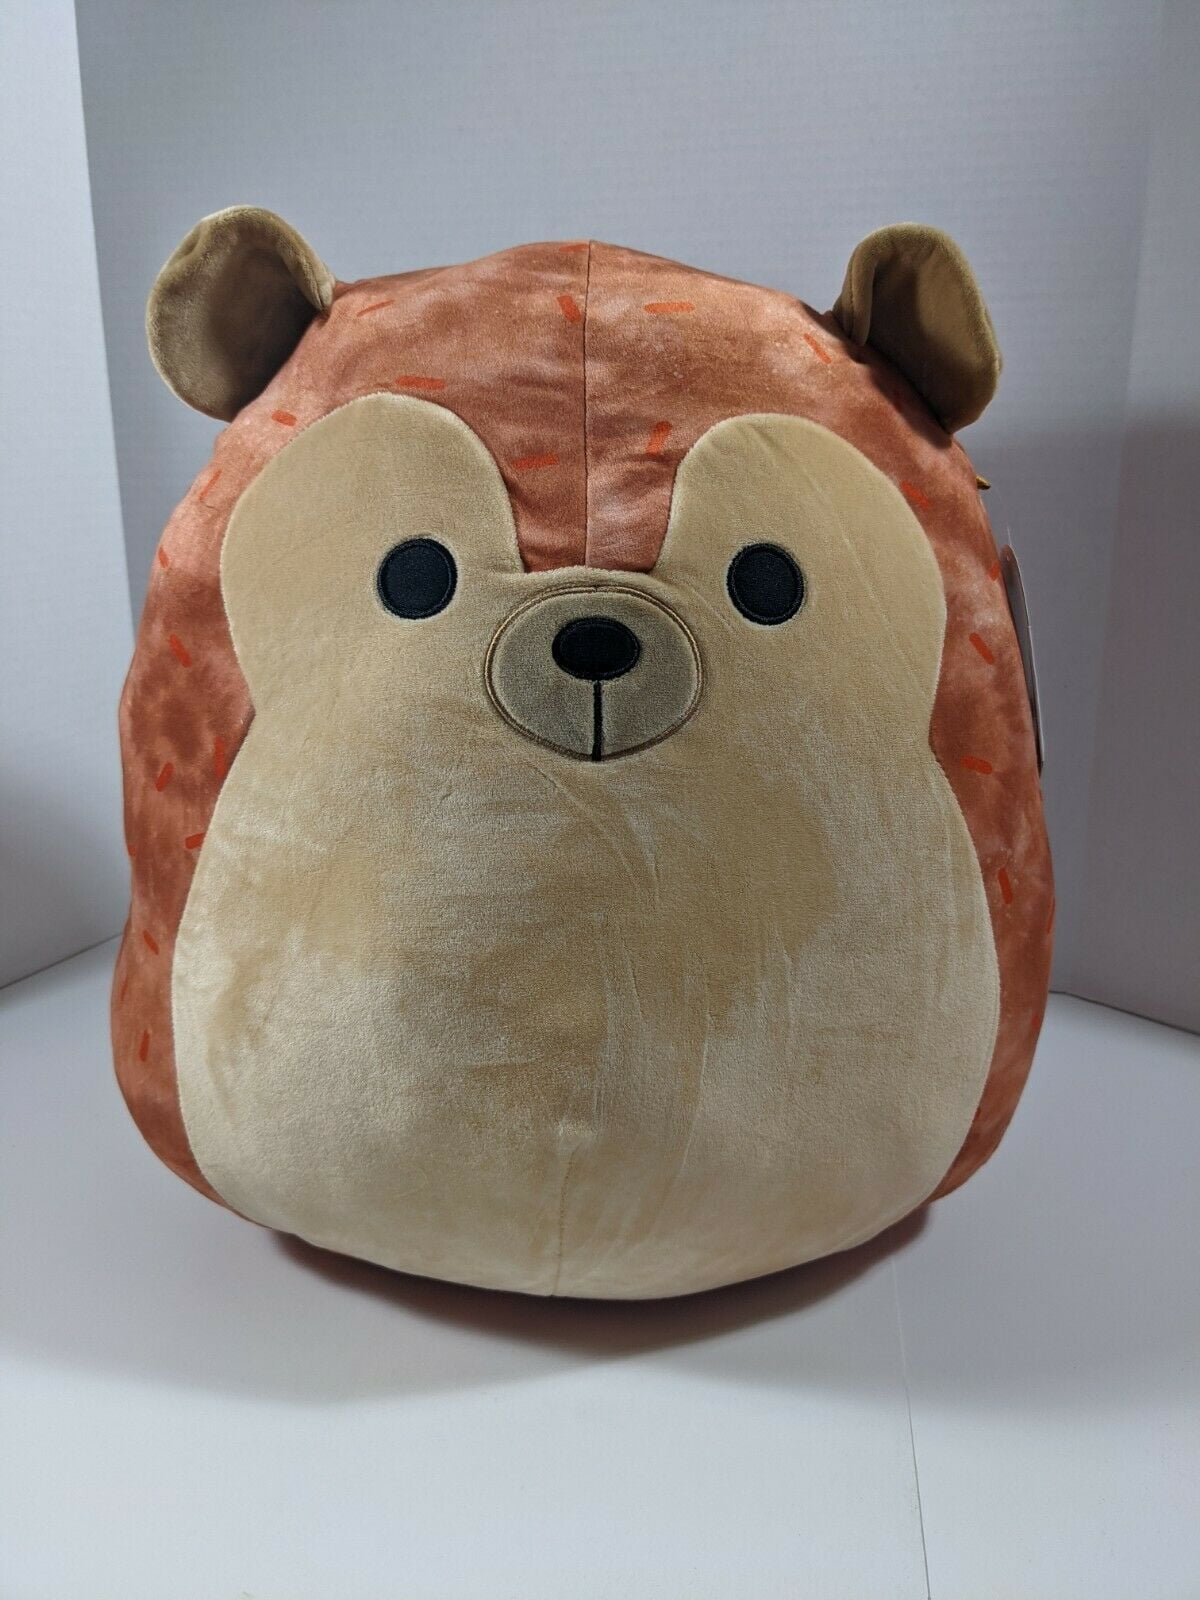 Details about   NWT SQUISHMALLOW BEAR 16" LARGE TEDDY BEAR BARON BLAKE 